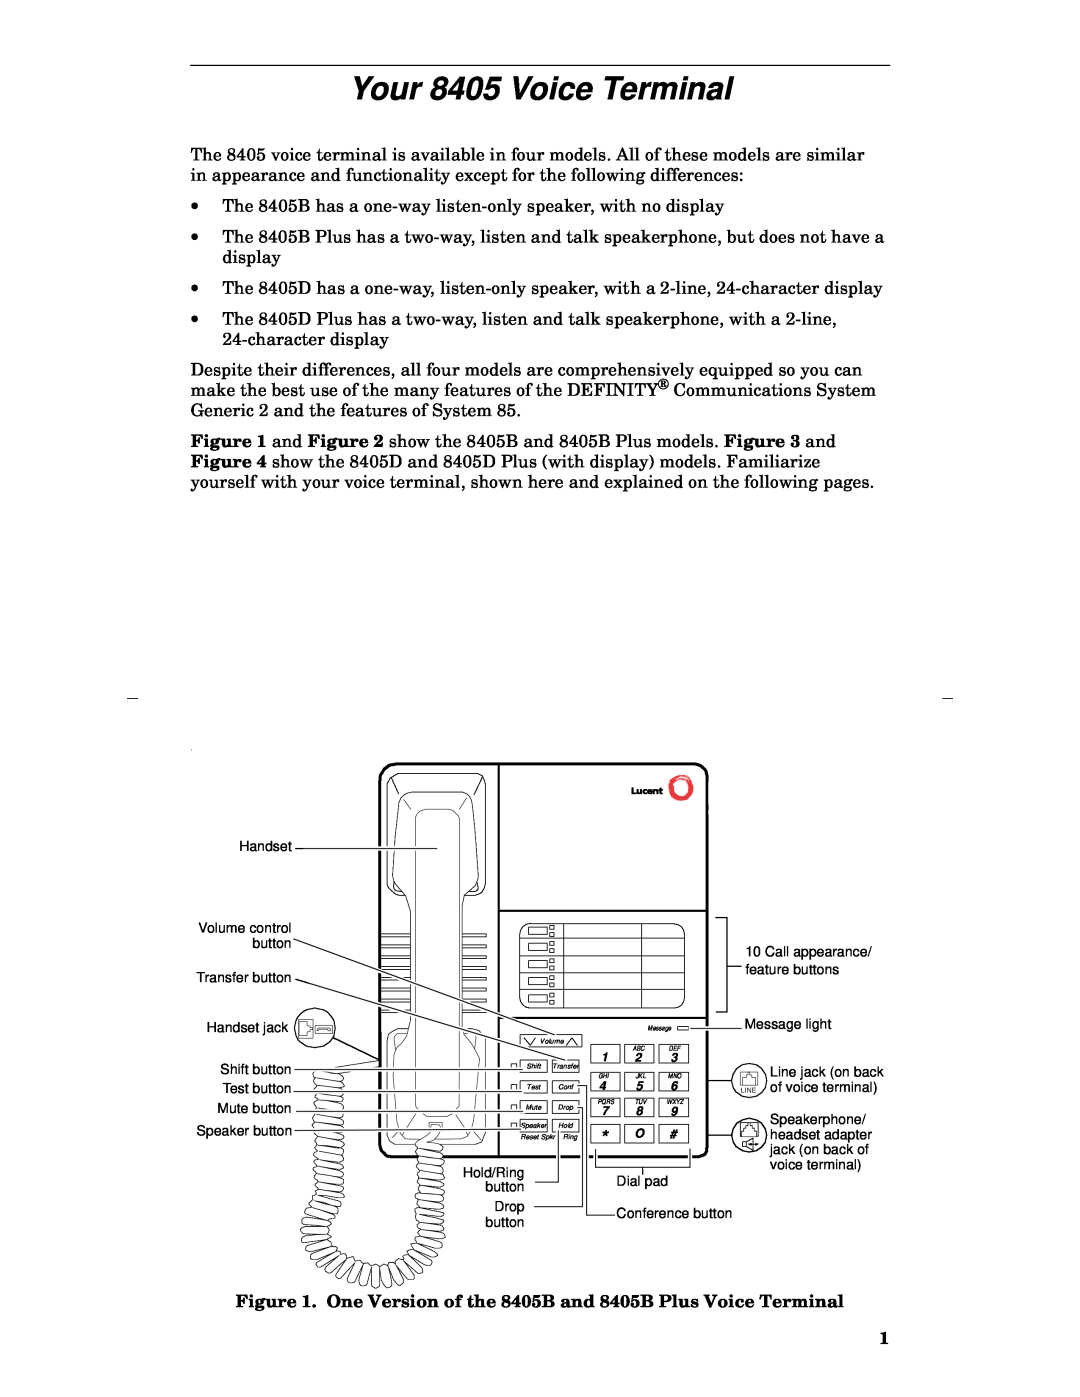 Lucent Technologies manual Your 8405 Voice Terminal, One Version of the 8405B and 8405B Plus Voice Terminal 